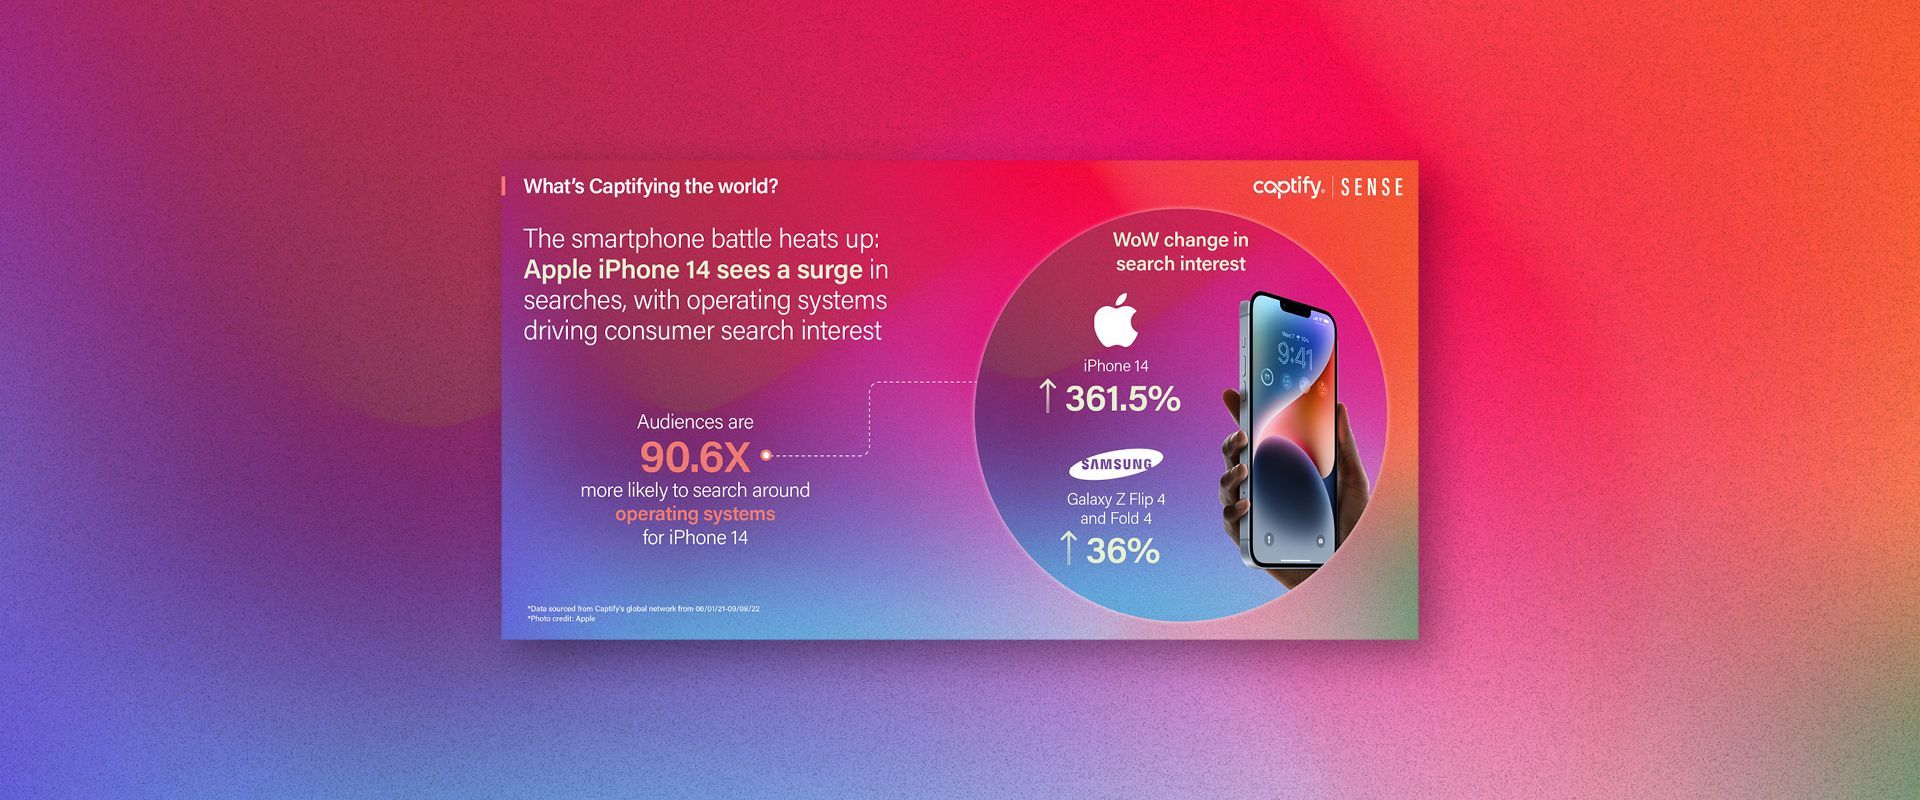 What’s Captifying The World: The Smartphone Battle Heats Up—Apple iPhone 14 Sees A Surge In Searches, With Operating Systems Driving Consumer Search Interest